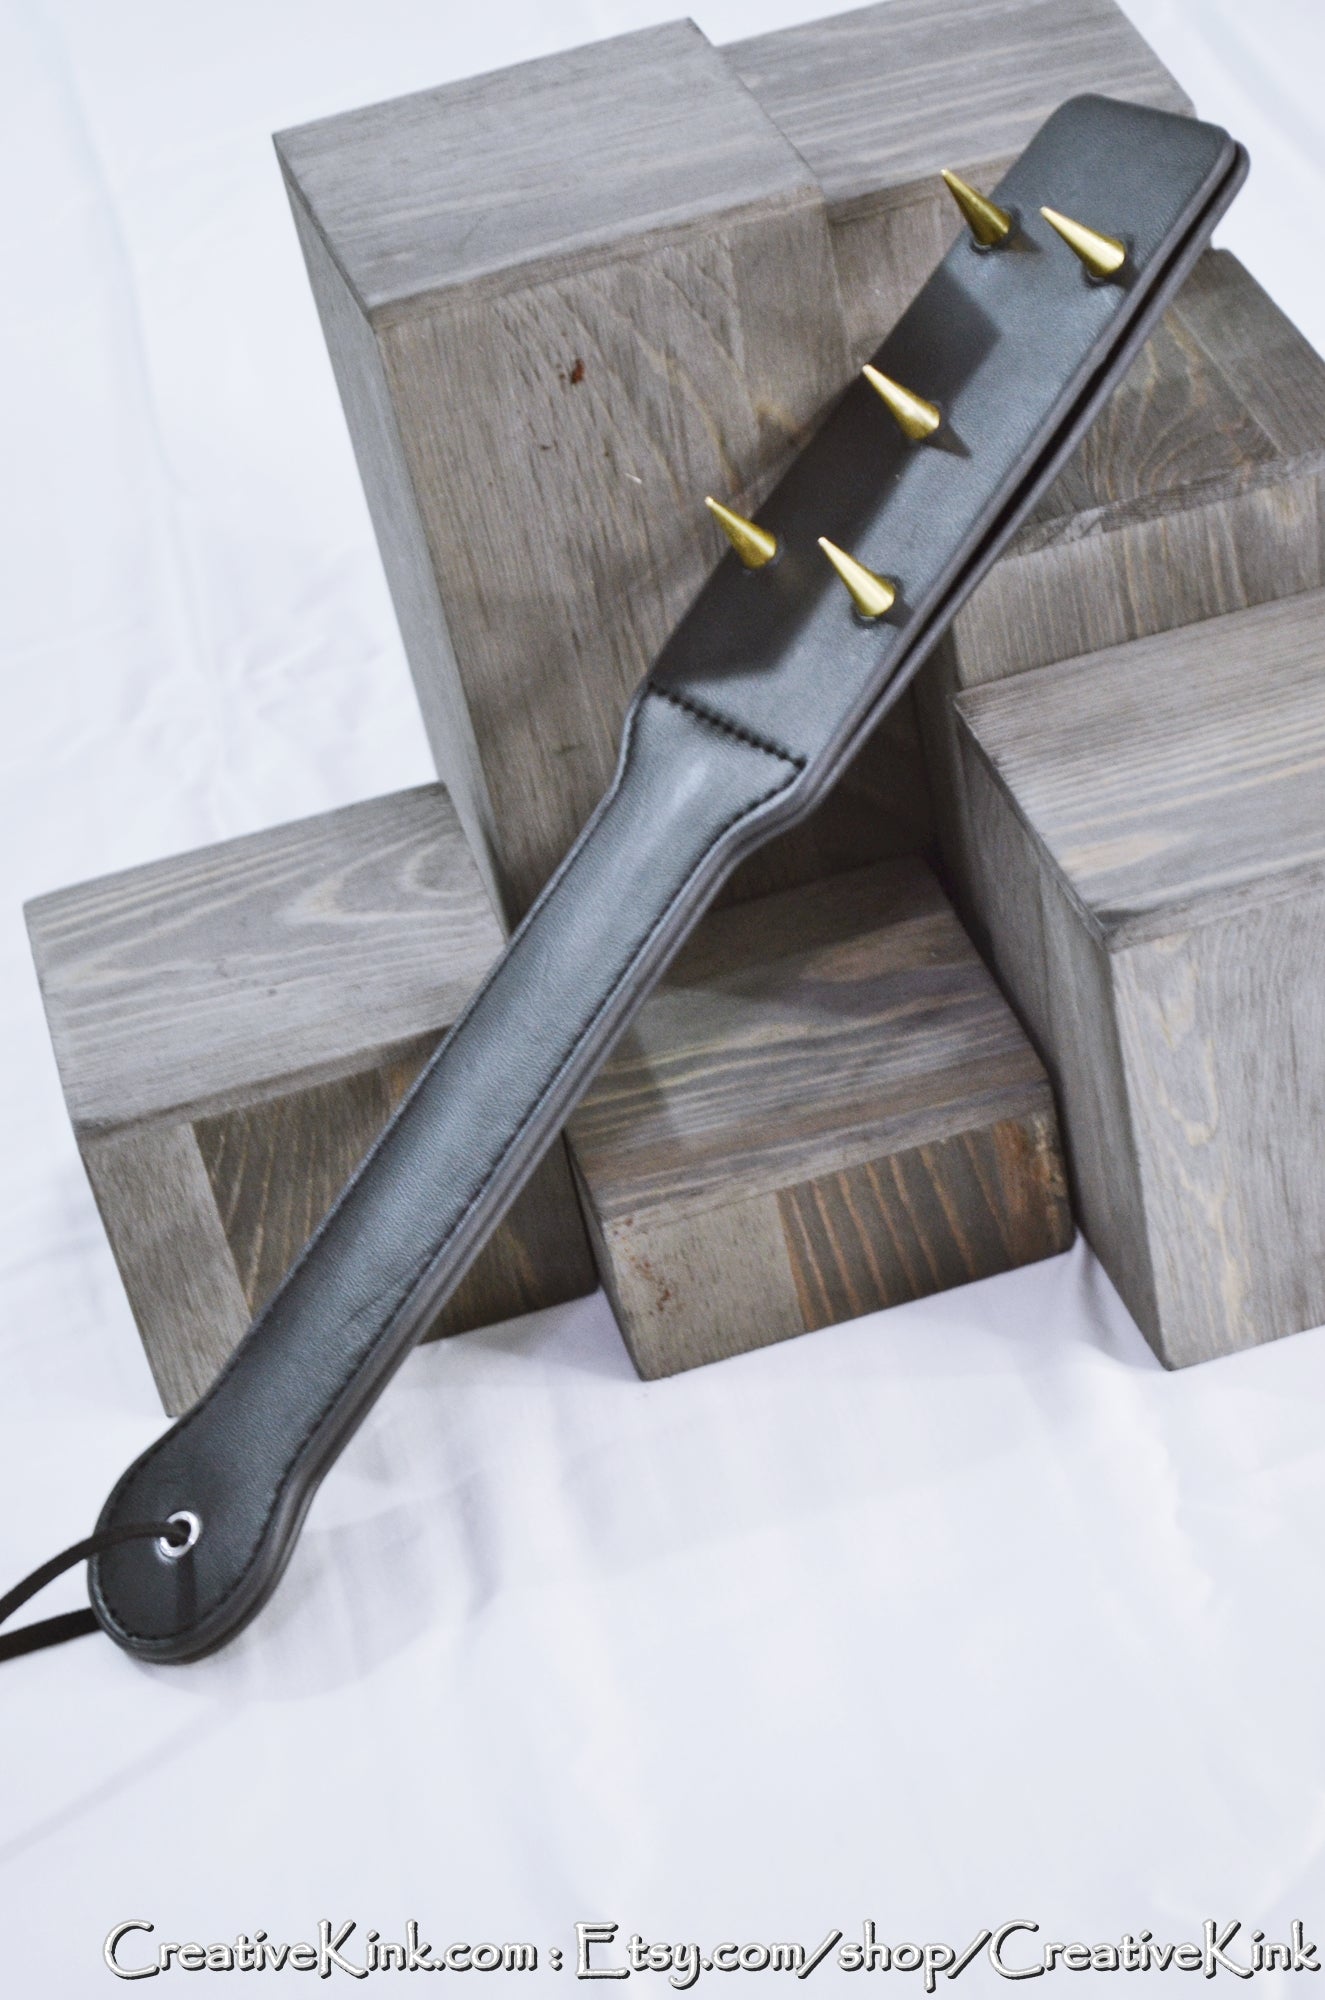 Leather Paddle - 12 Inches of Thickened Leather with Steel or Brass Studs - BDSM Spanking Tool